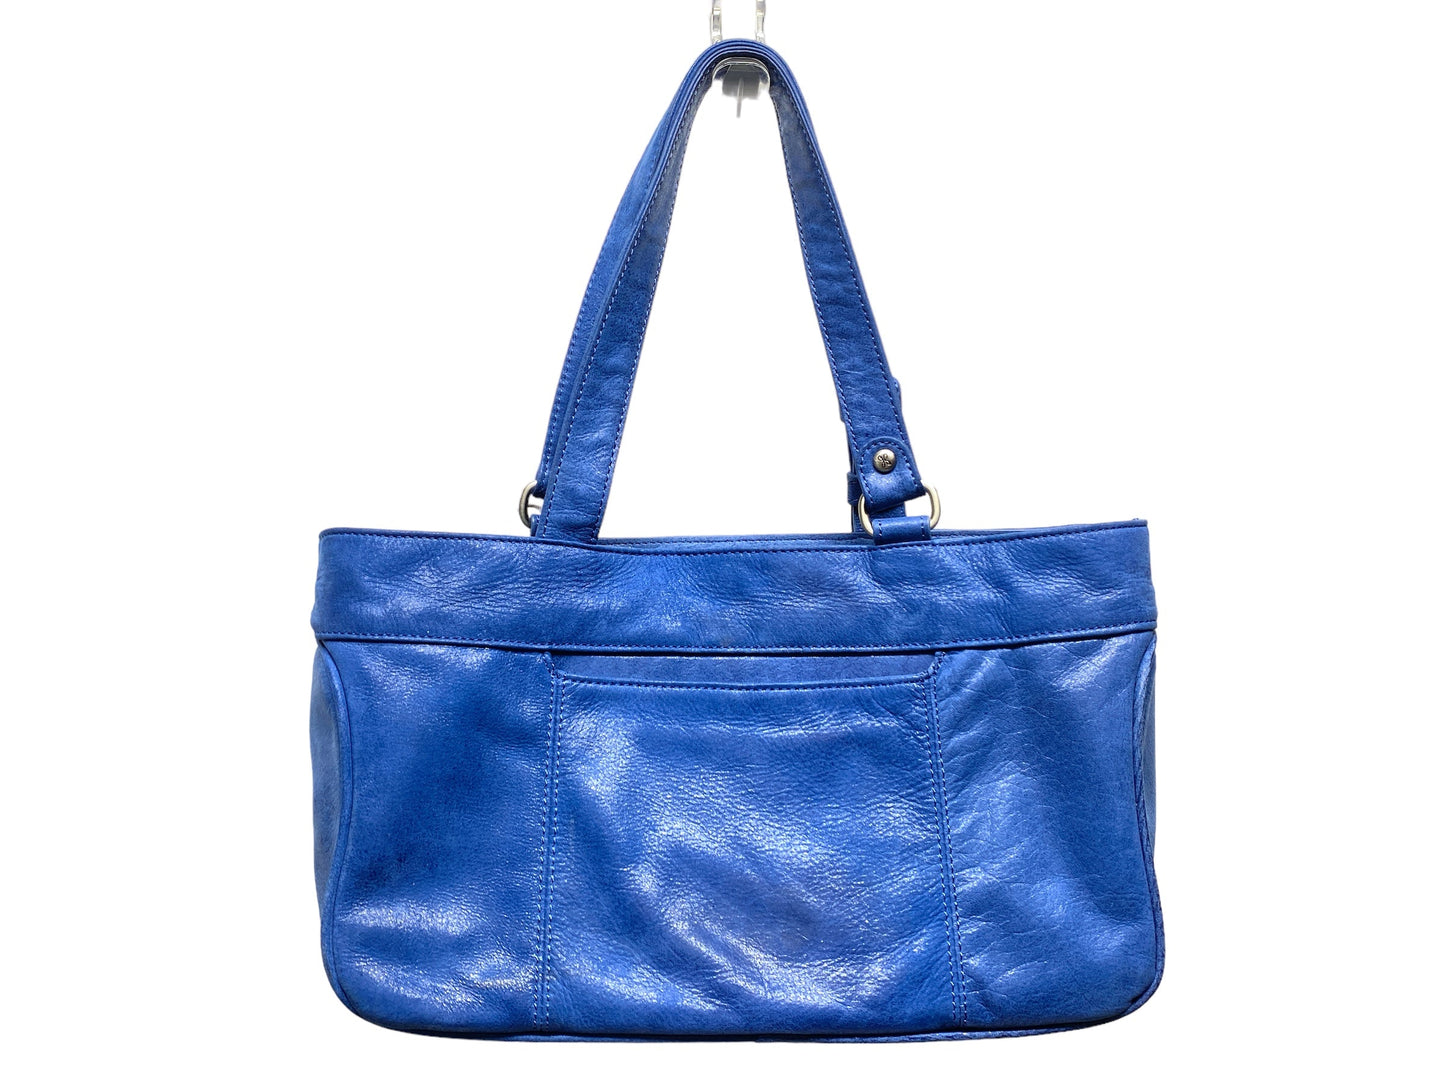 Tote Designer By Hobo Intl  Size: Small